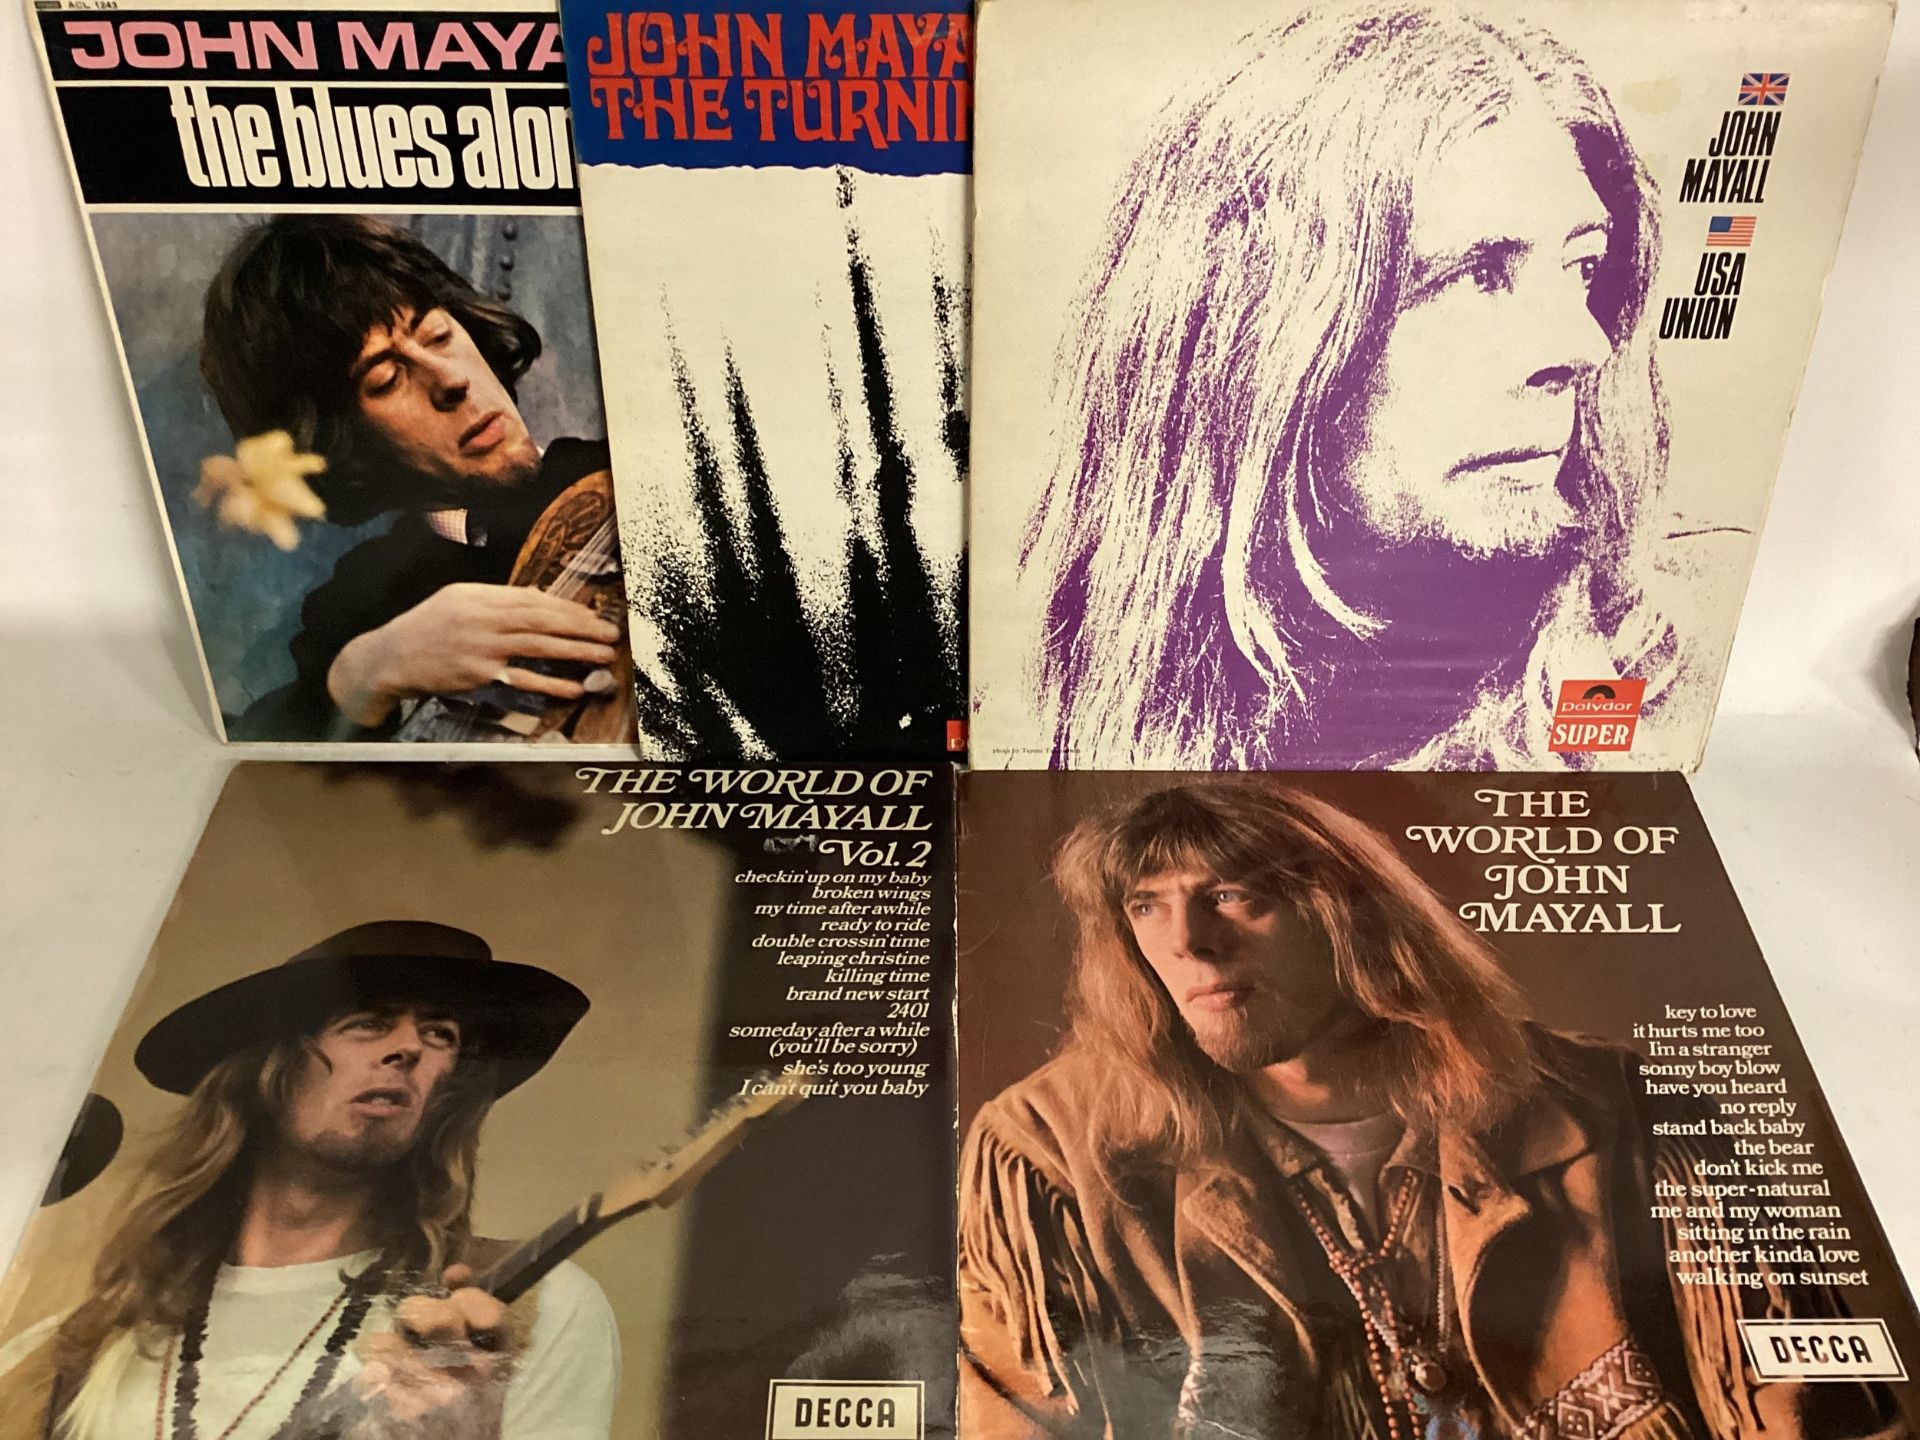 COLLECTION OF 5 JOHN MAYALL ALBUMS.